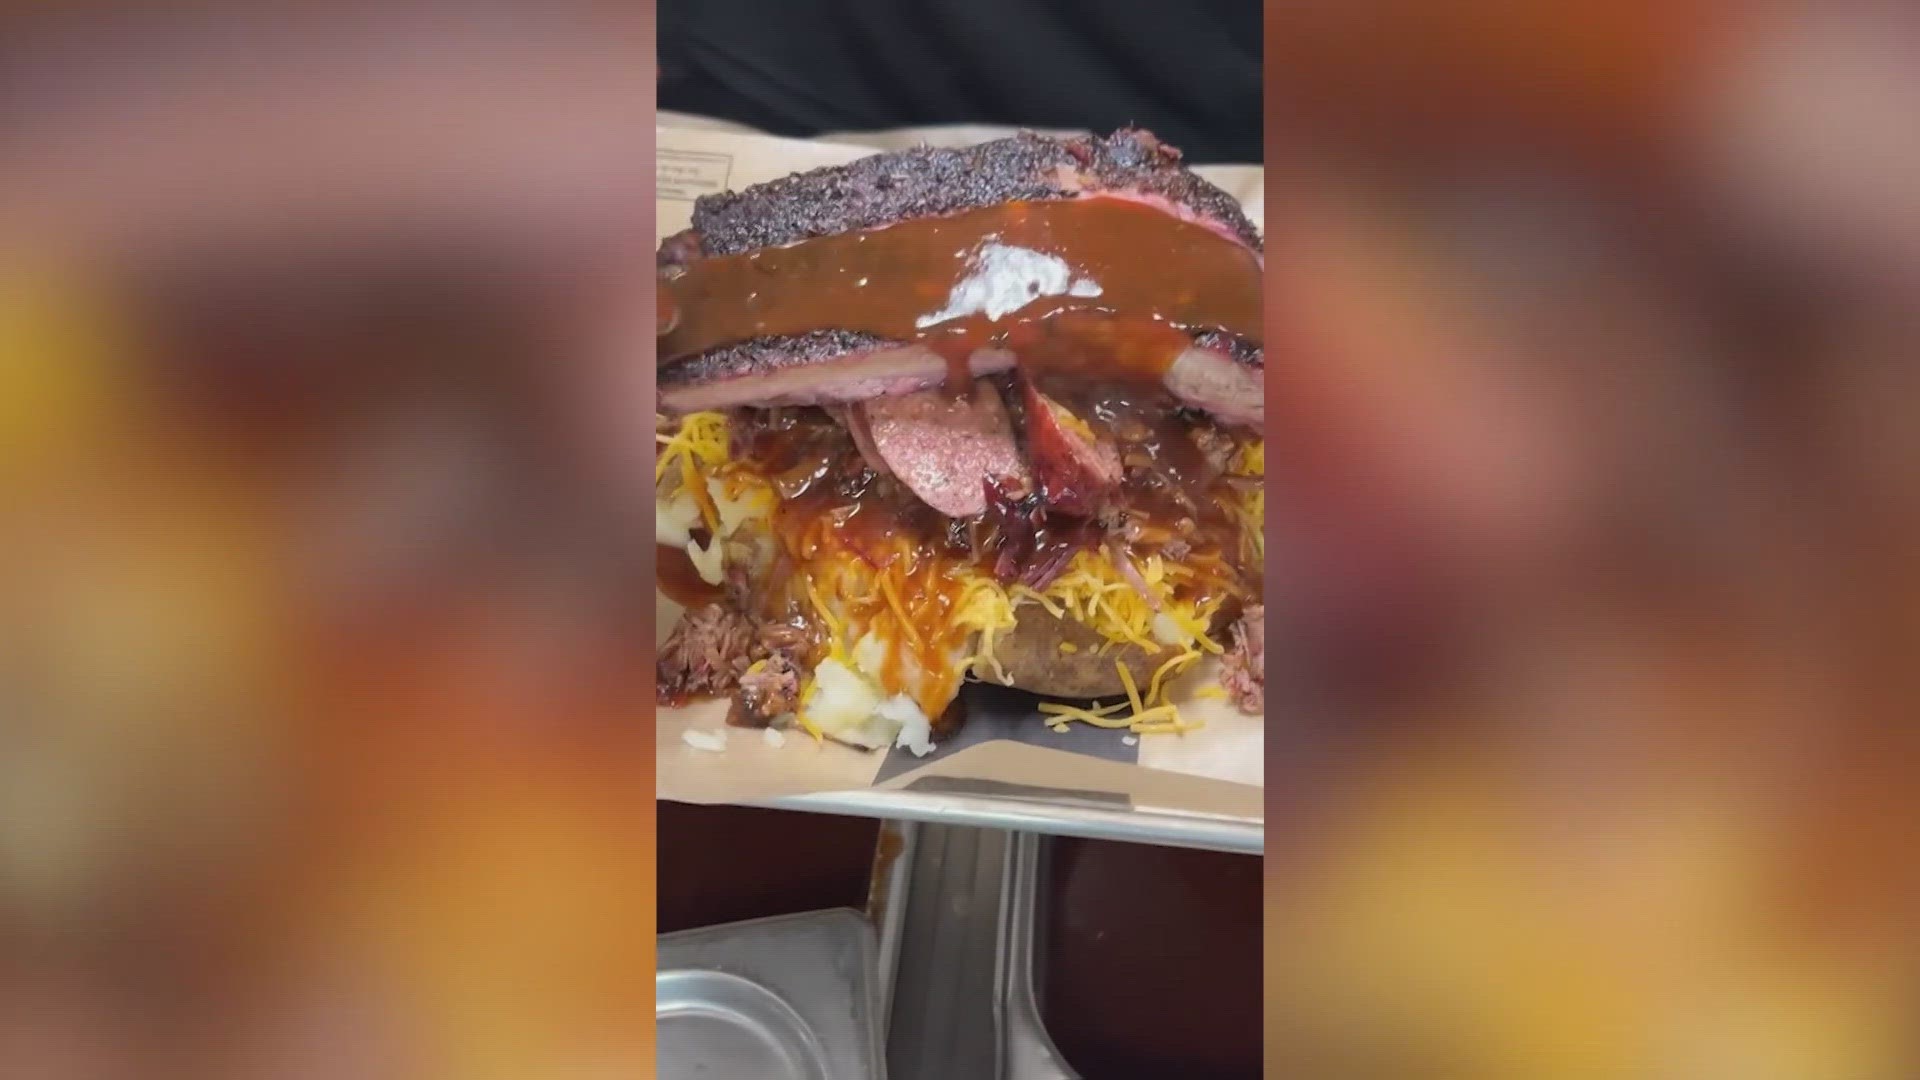 MJ's House of Smoke in Arlington serves up a baked potato piled with cheese, butter, and three kinds of meat soaked in barbecue sauce.